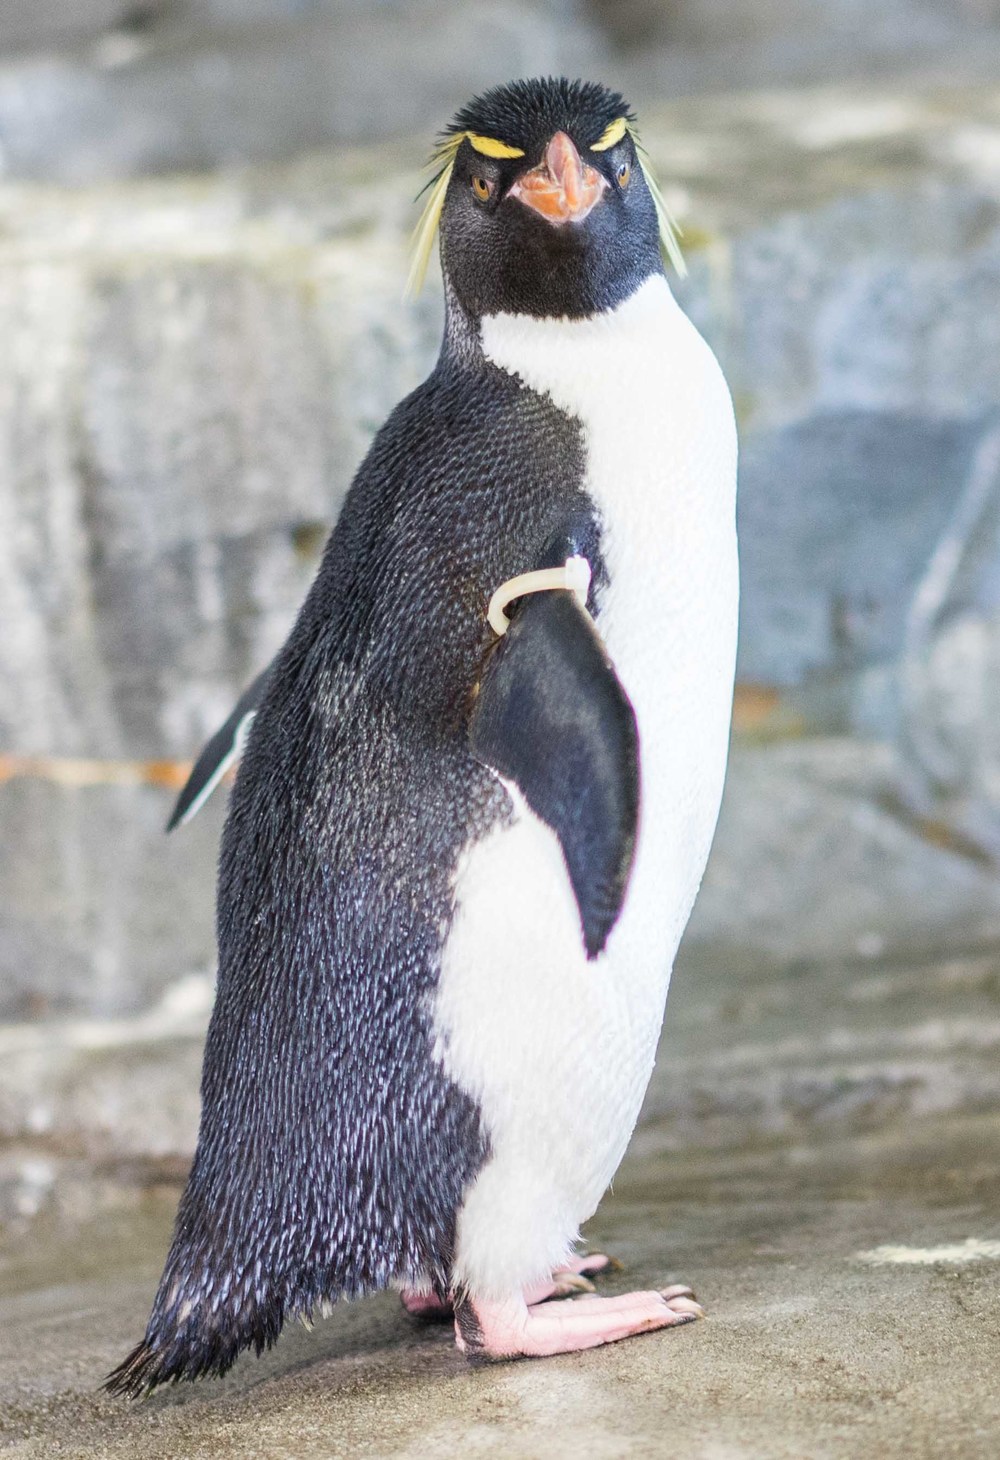 My favourite animal! Penguin doing his best pose for the camera. 